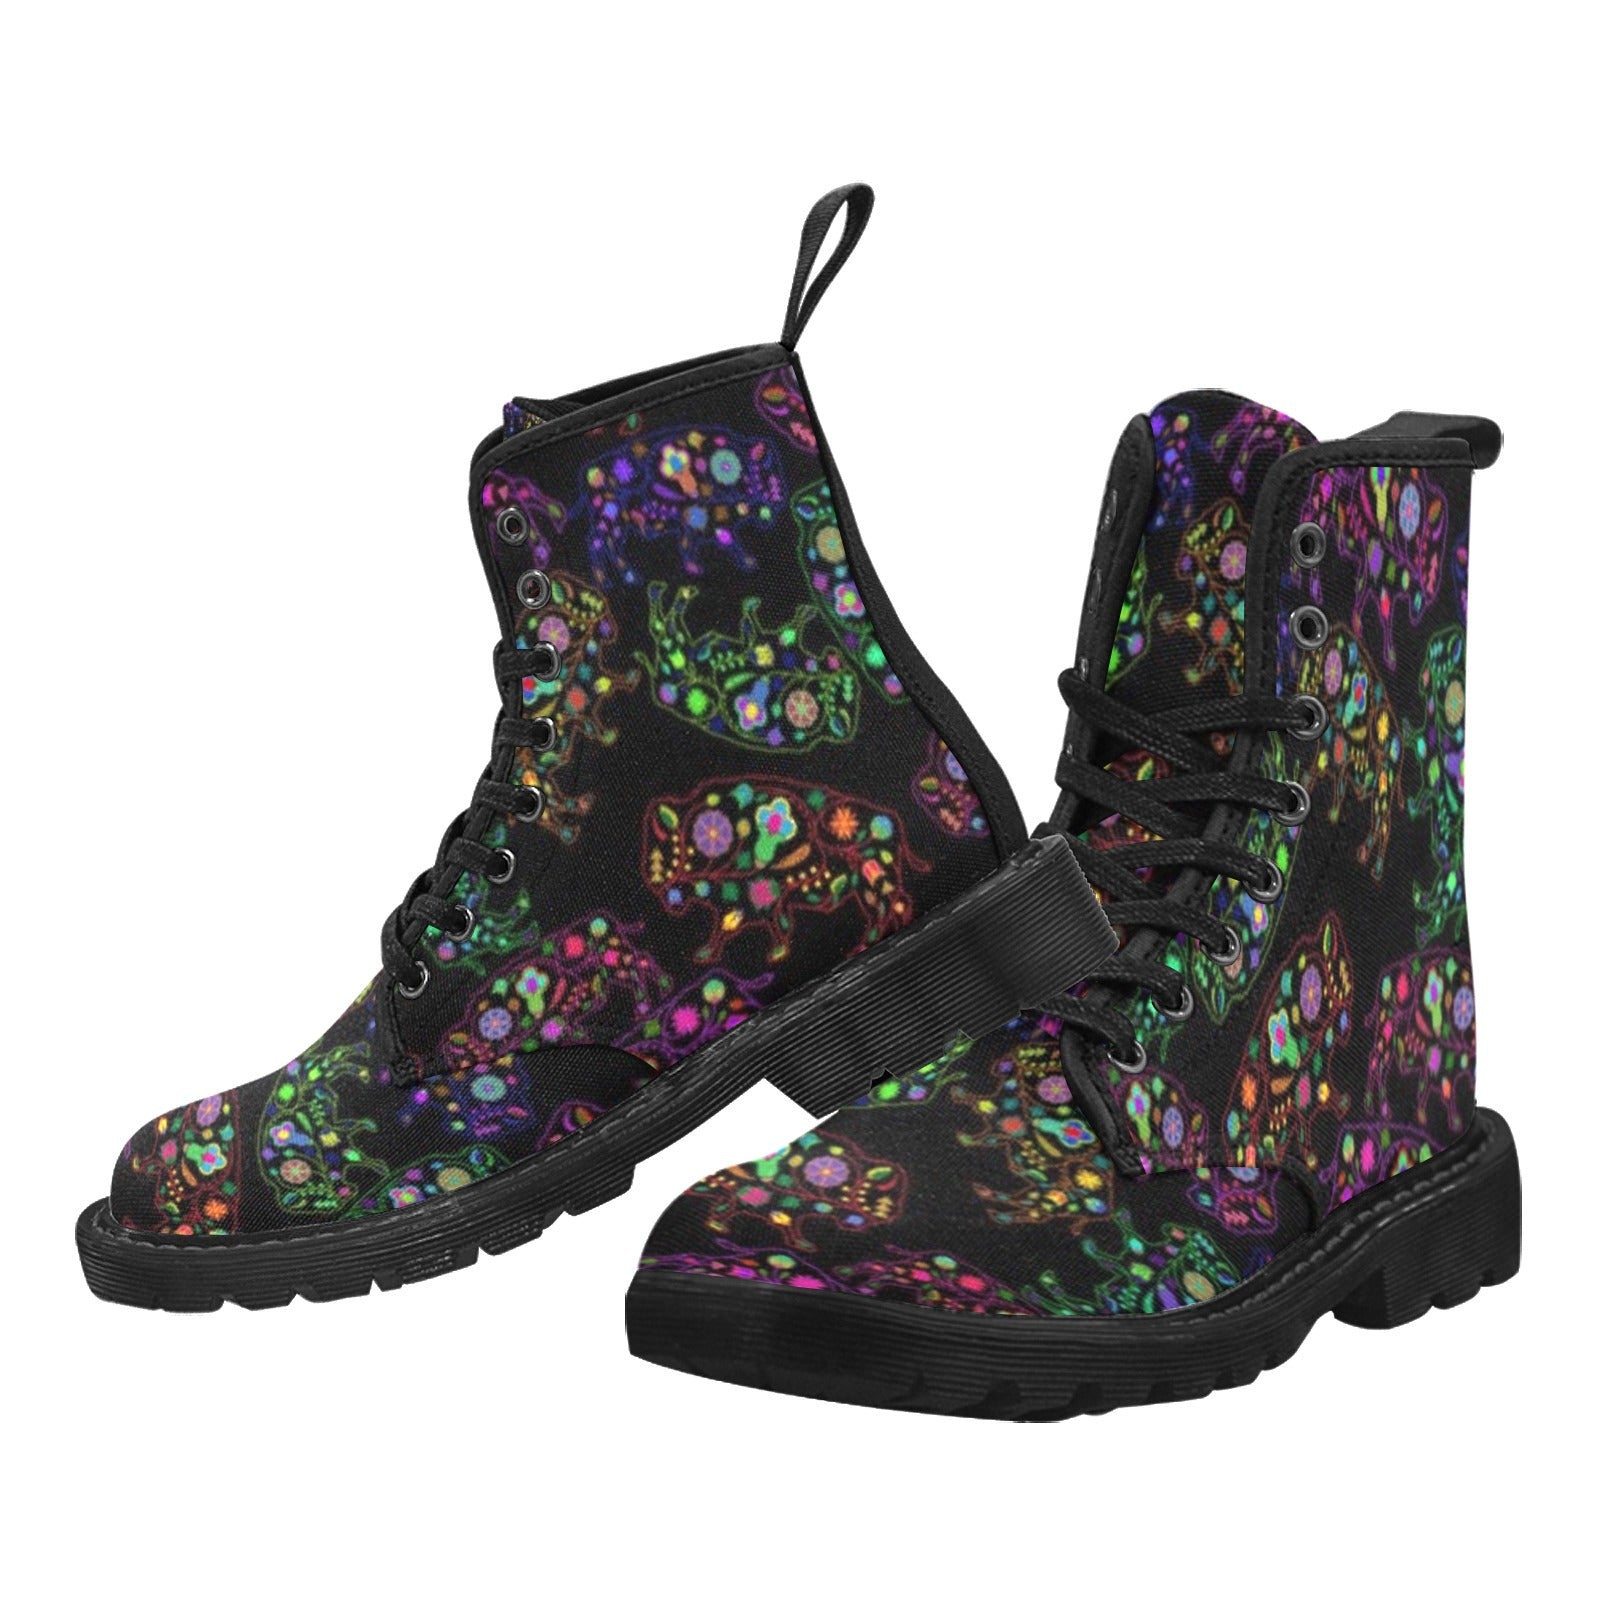 Neon Floral Buffalos Boots for Women (Black)